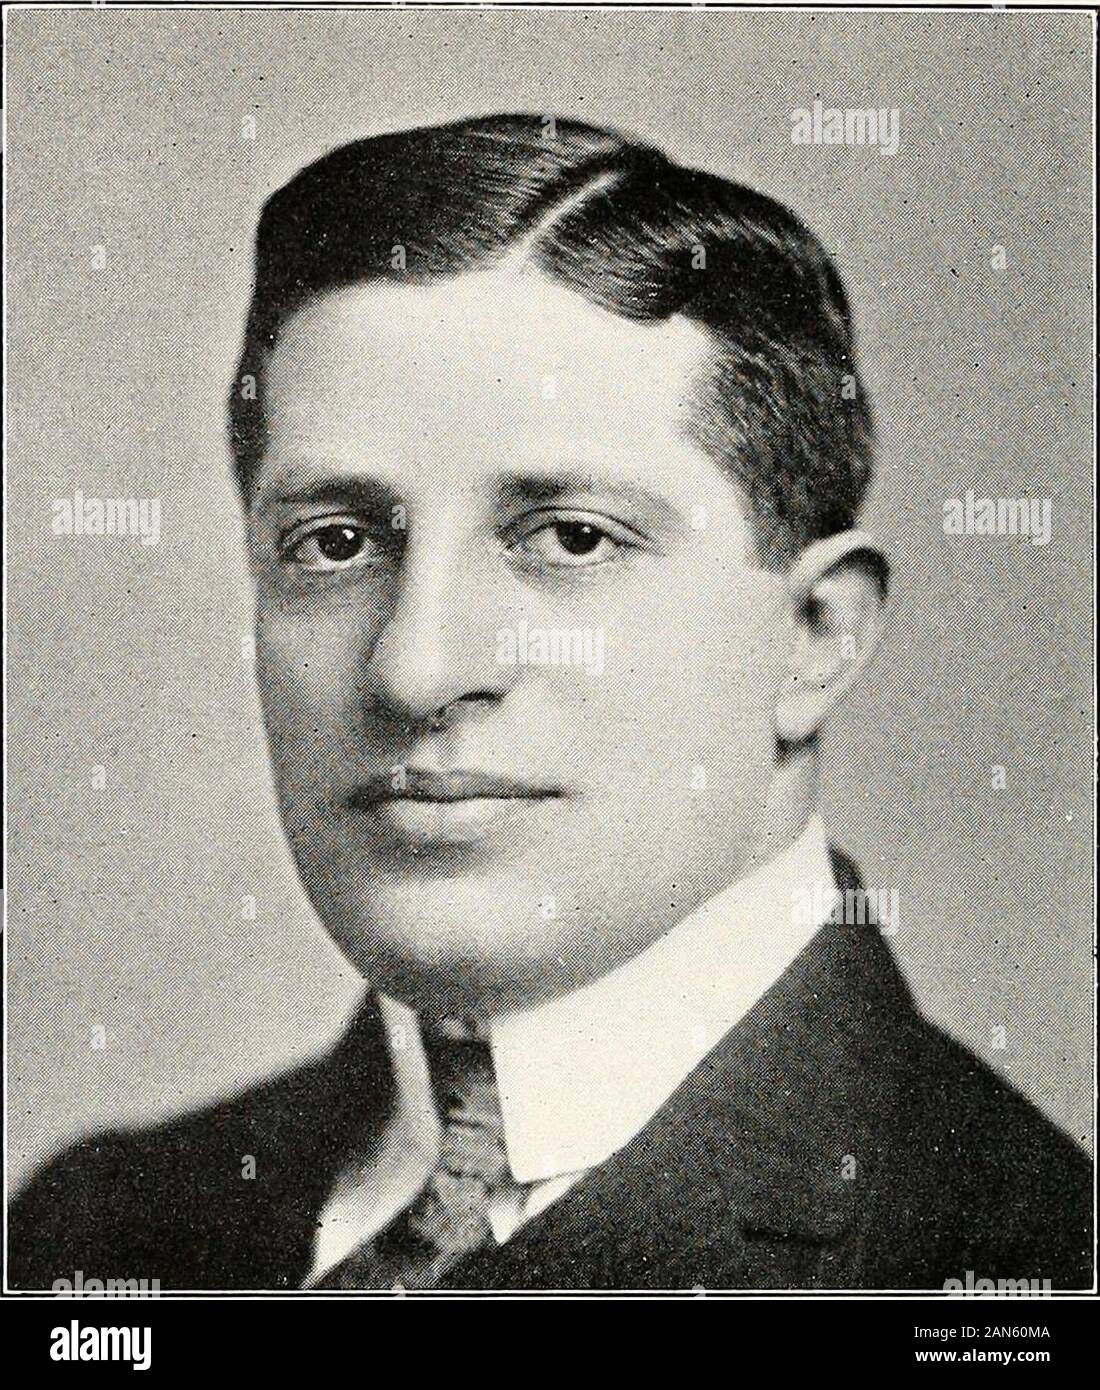 Distinguished men of Philadelphia and of Pennsylvania . SCHLESIXGER, LIONEL, TELLER, atty.; s. Abe aidAmelia (Teller) Schlesinger; b. Phila., July 29, 1882; A. B..Central High School, LL.B., U. o£ P., 1904; practced since1904; City, Dem. and Lincoln Party nominee for Legislature in1906; appt. U. S. Naval Cadet, 1901; mem. ManufacturersClub, Law Acad., Law Assn.; F. & A. M., Shekinah LodgeNo. 246, University R. A. Chapter No. 256, Philadelphia Coun-cil No. 2; office, 1201 Chestnut St., Phila. STERX. IS ADORE, atty.: b. Phila., .July 12, 1881; s. Will-iam and Rose (Hartmann) Stern; Phila. Schls. Stock Photo